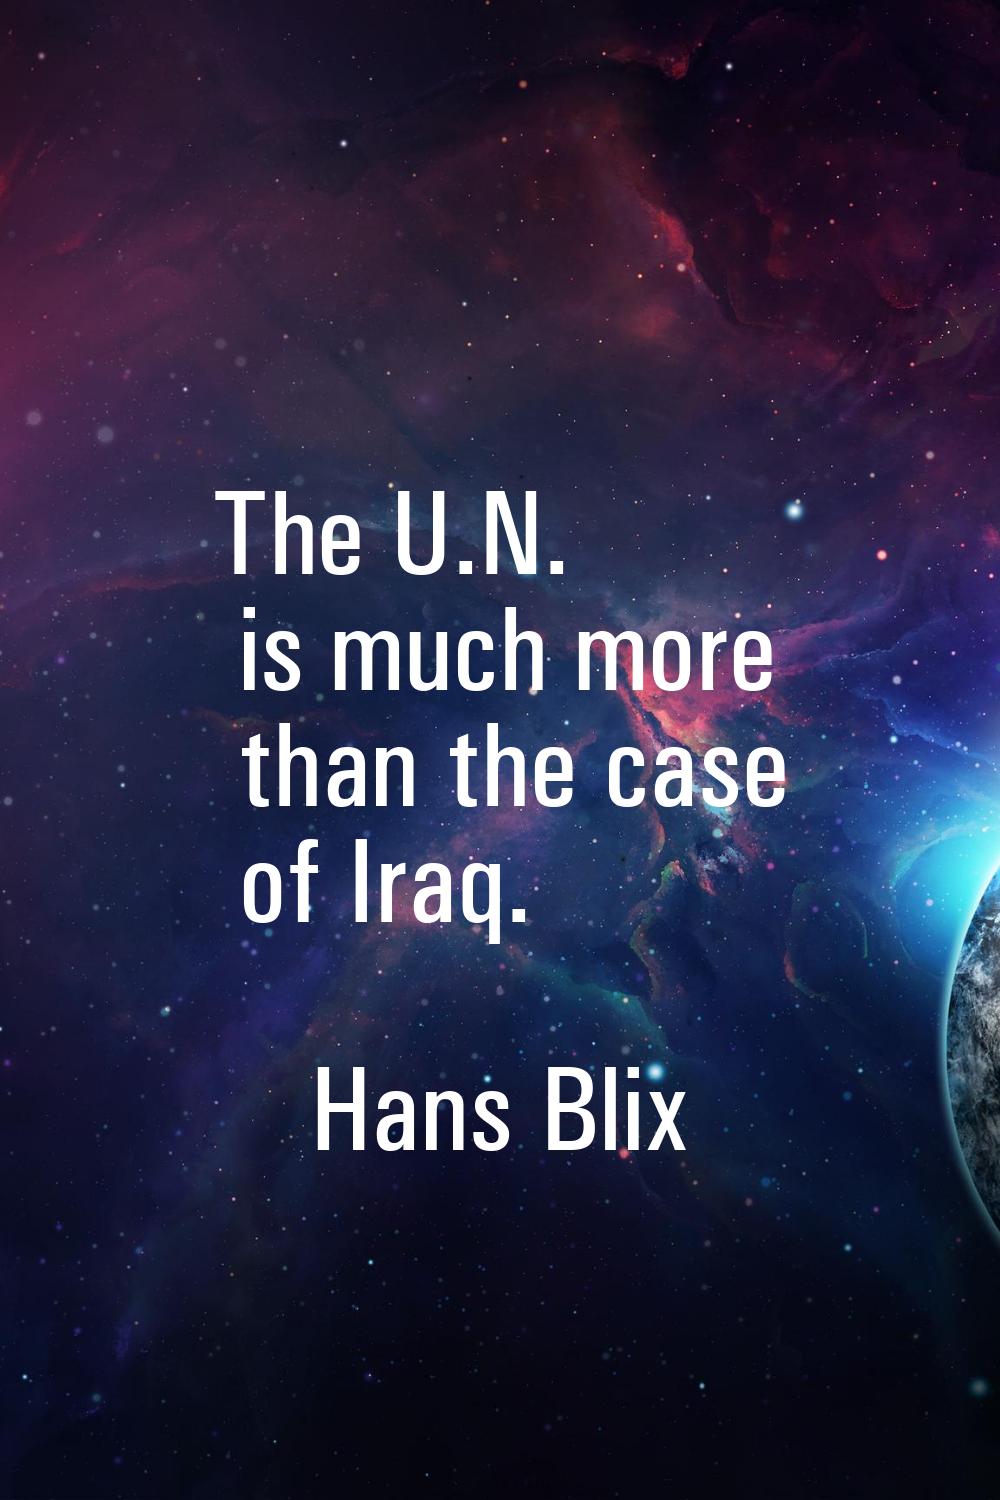 The U.N. is much more than the case of Iraq.